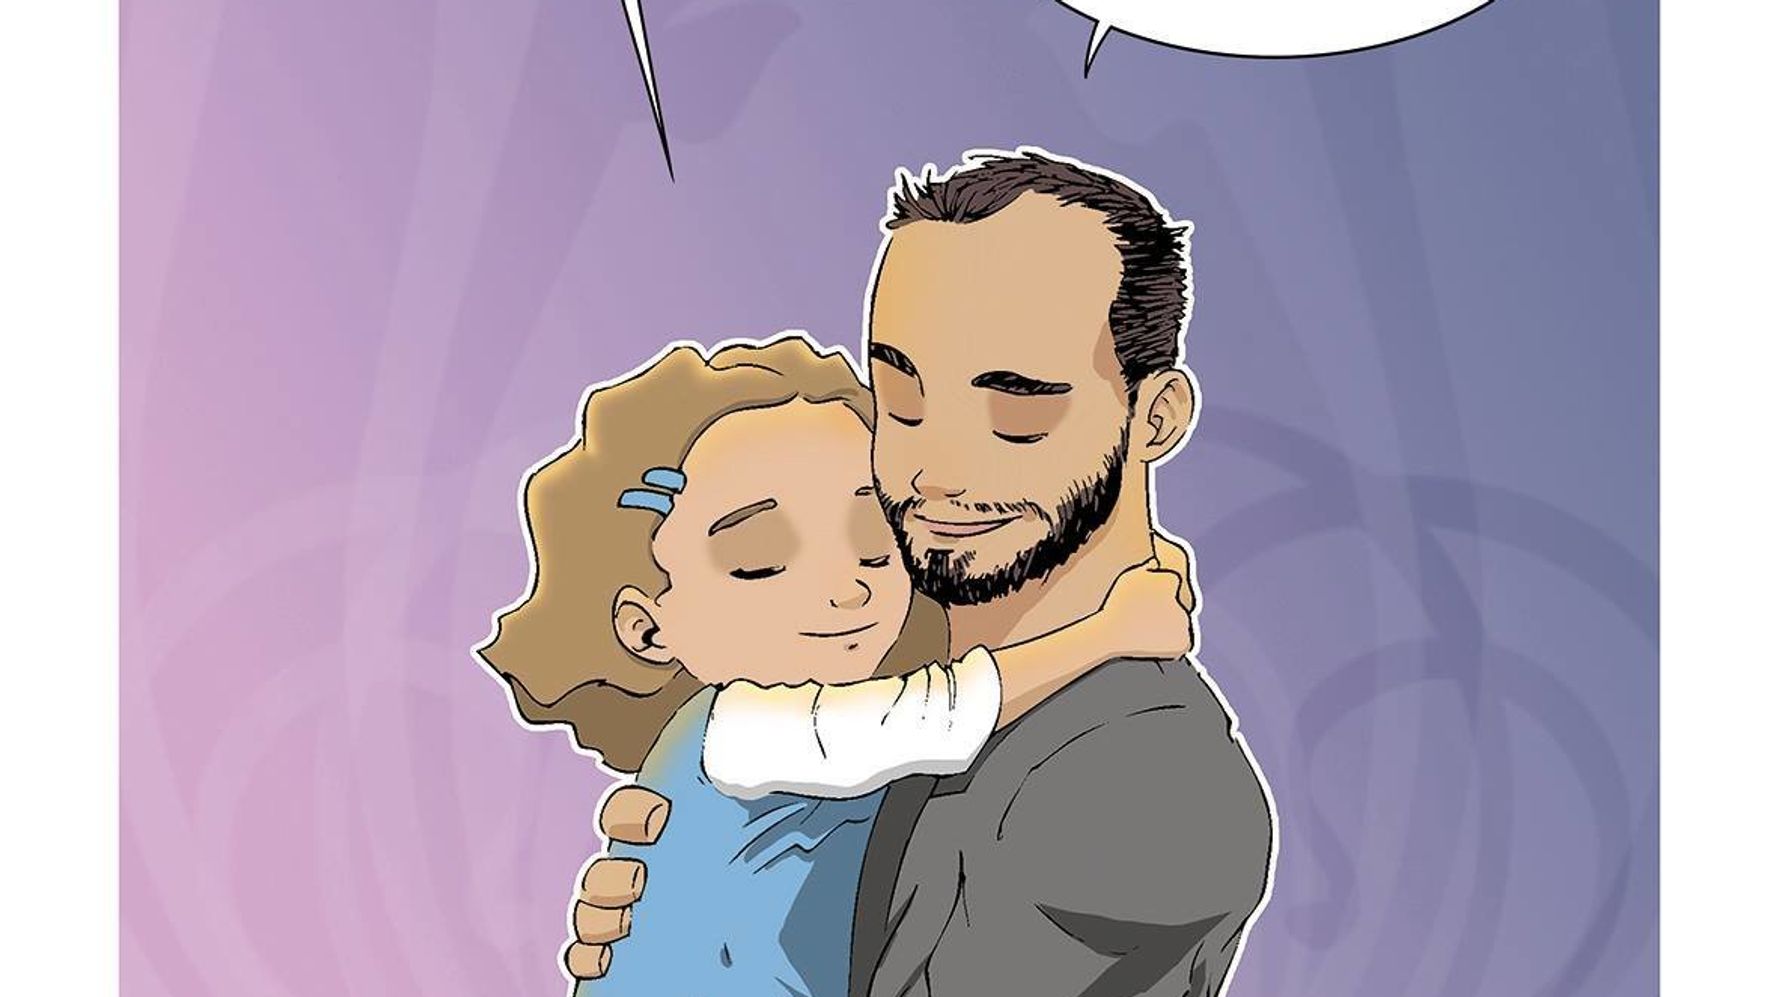 father daughter,dads and daughters,dad and daughter,parenting illustrations...